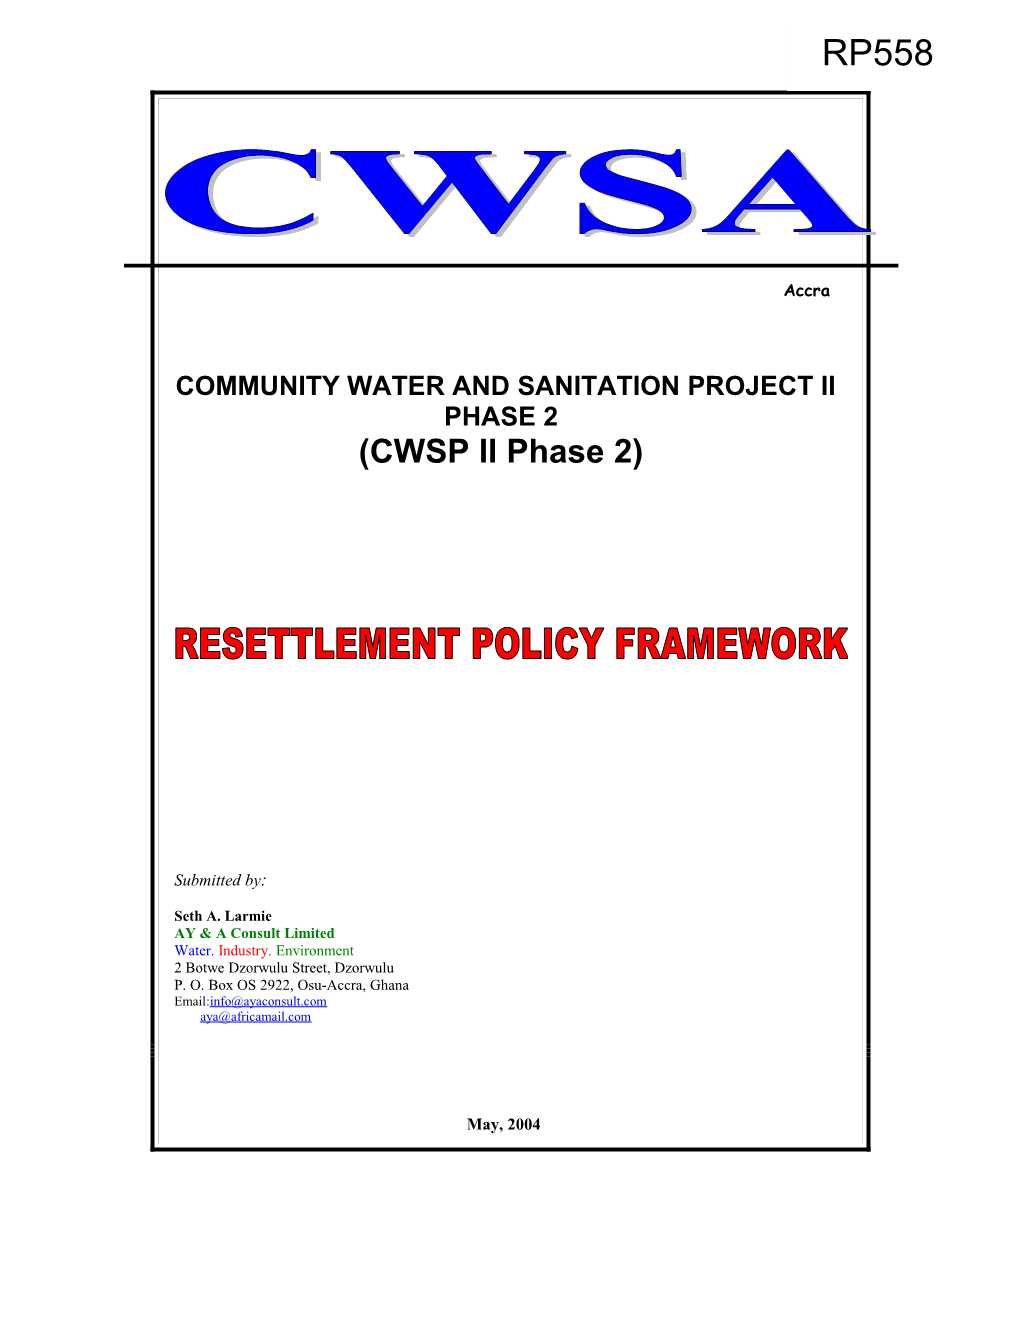 Community Water and Sanitation Project Ii Phase 2